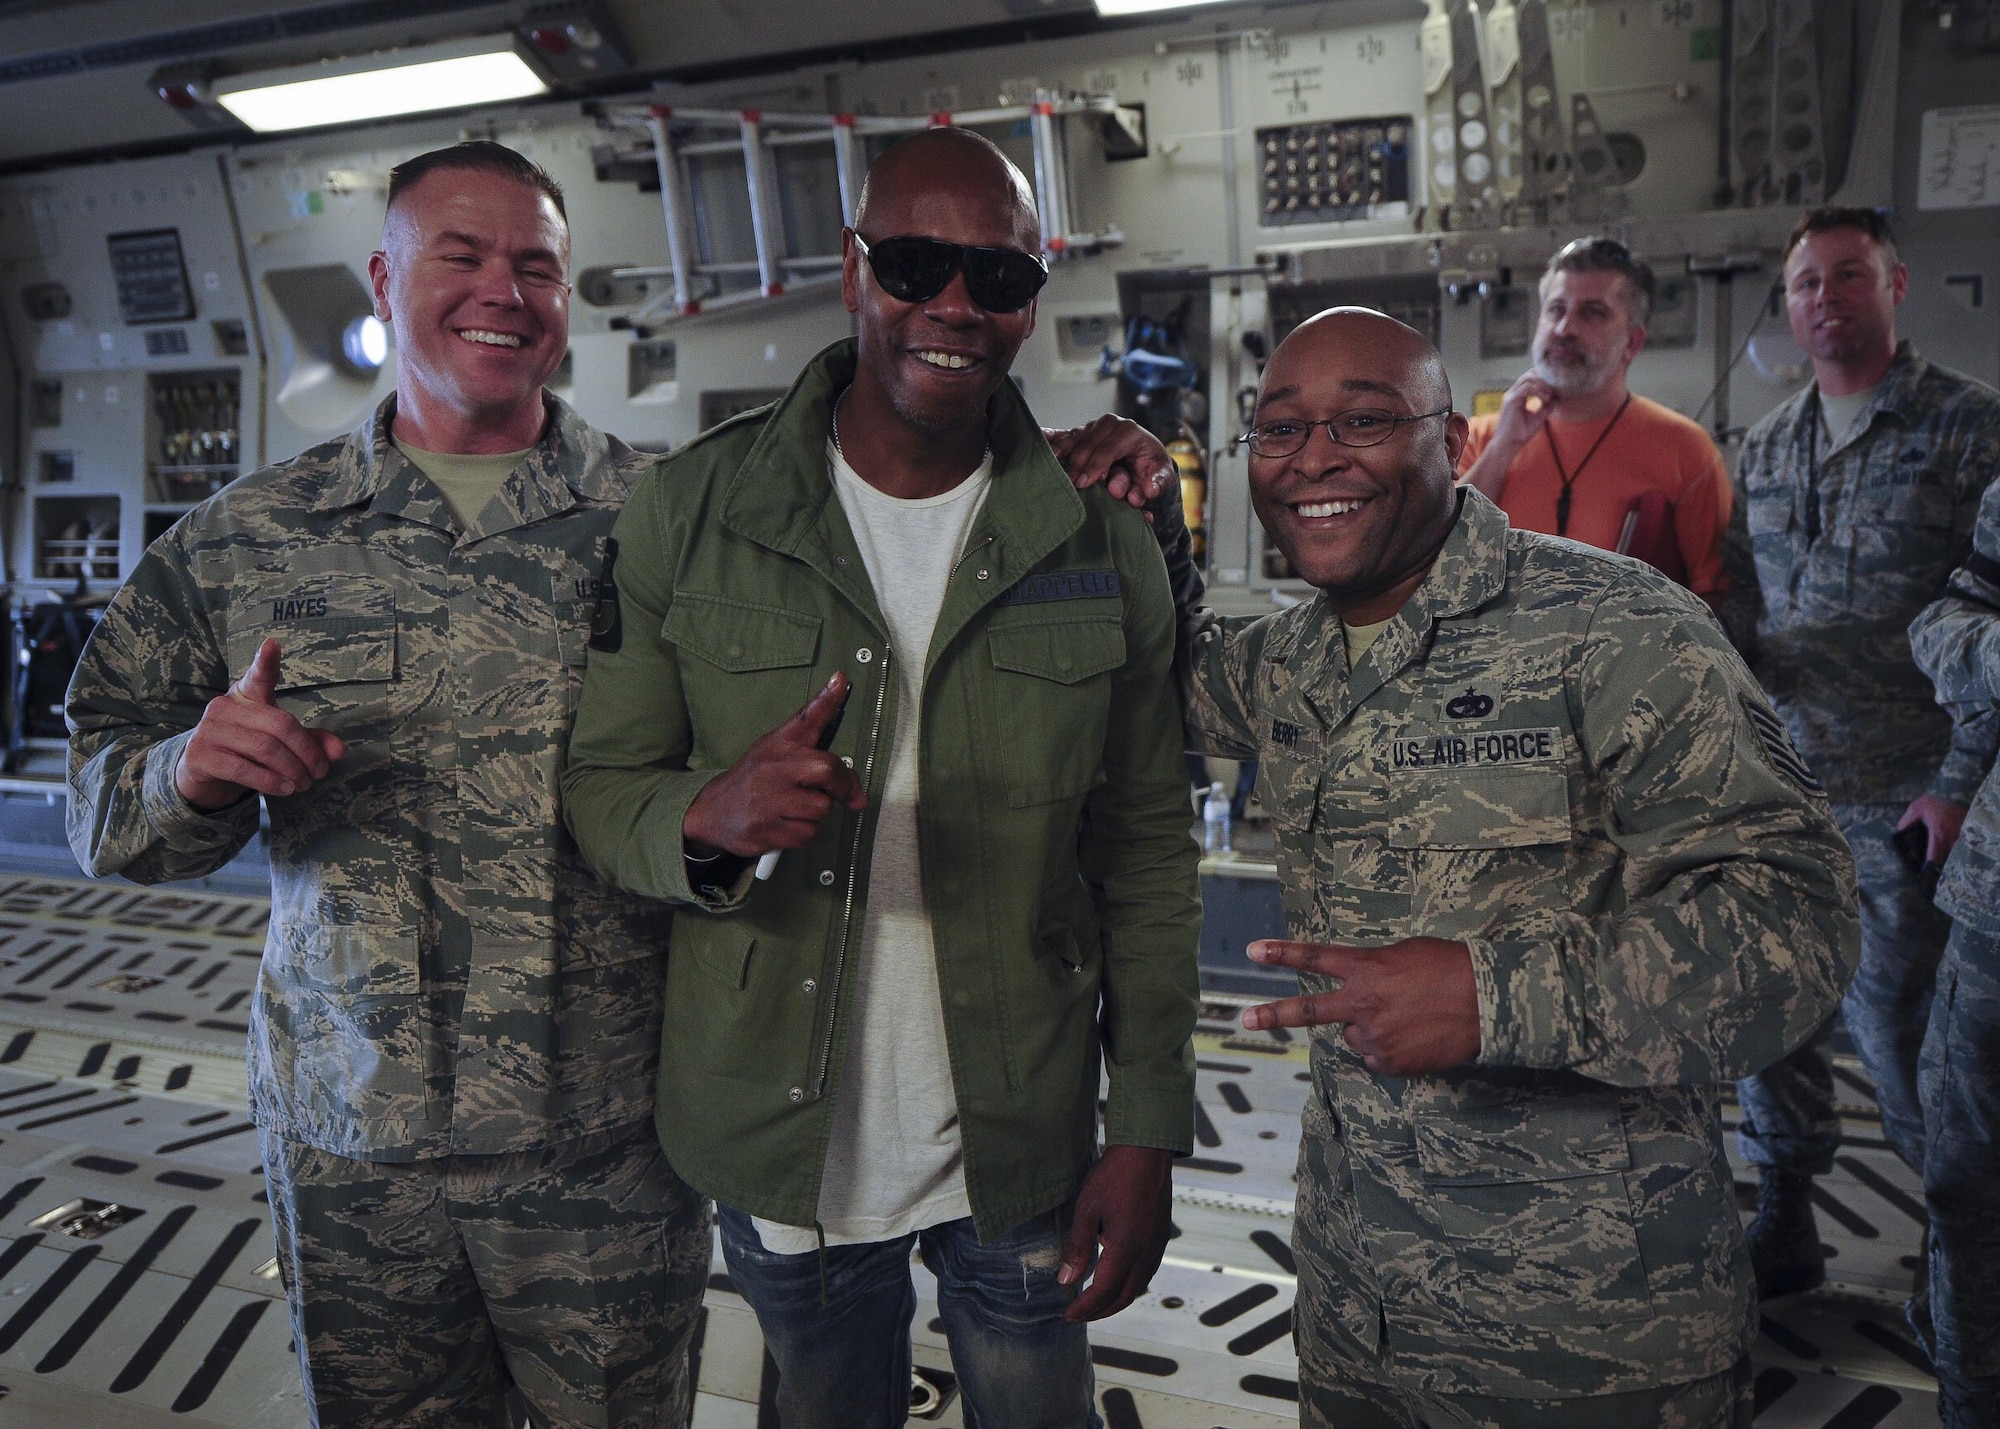 (from left)  Master Sgt. Mathew Hayes, 315th Aircraft Maintenance Squadron, Actor/comedian Dave Chappelle, and Tech Sgt. Philip Berry, 38th Aerial Port Squadron pose for a photo on a Joint Base Charleston, S.C. Feb. 2. Chappelle was in town for his stand-up comedy show when he made the visit to see service members and federal civilians at the base Feb. 2. (U.S. Air Force photo by Senior Airman Tom Brading)